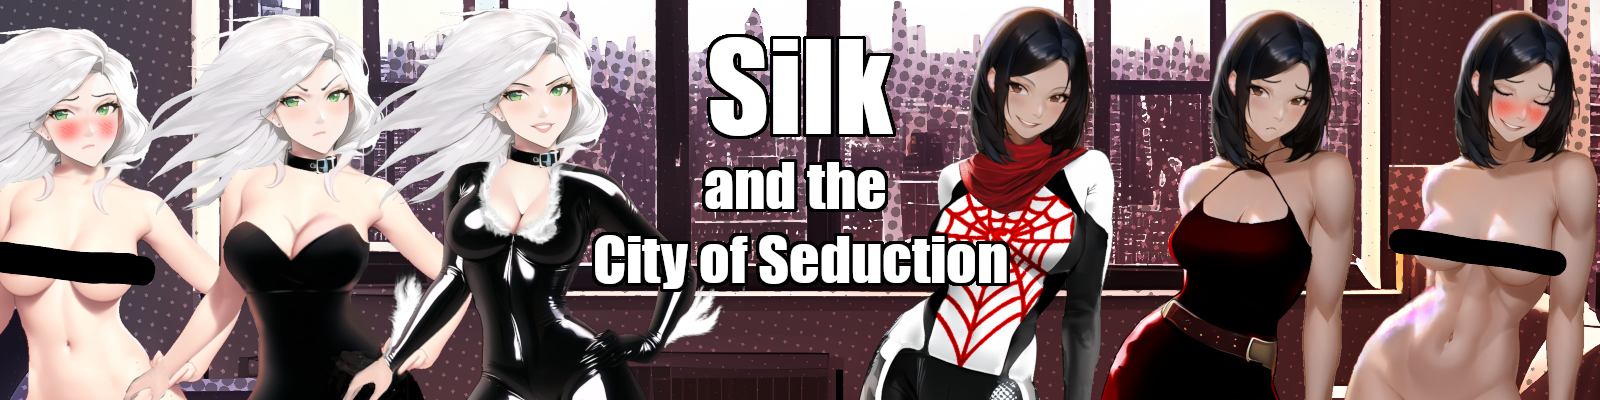 Silk and the City of Seduction poster